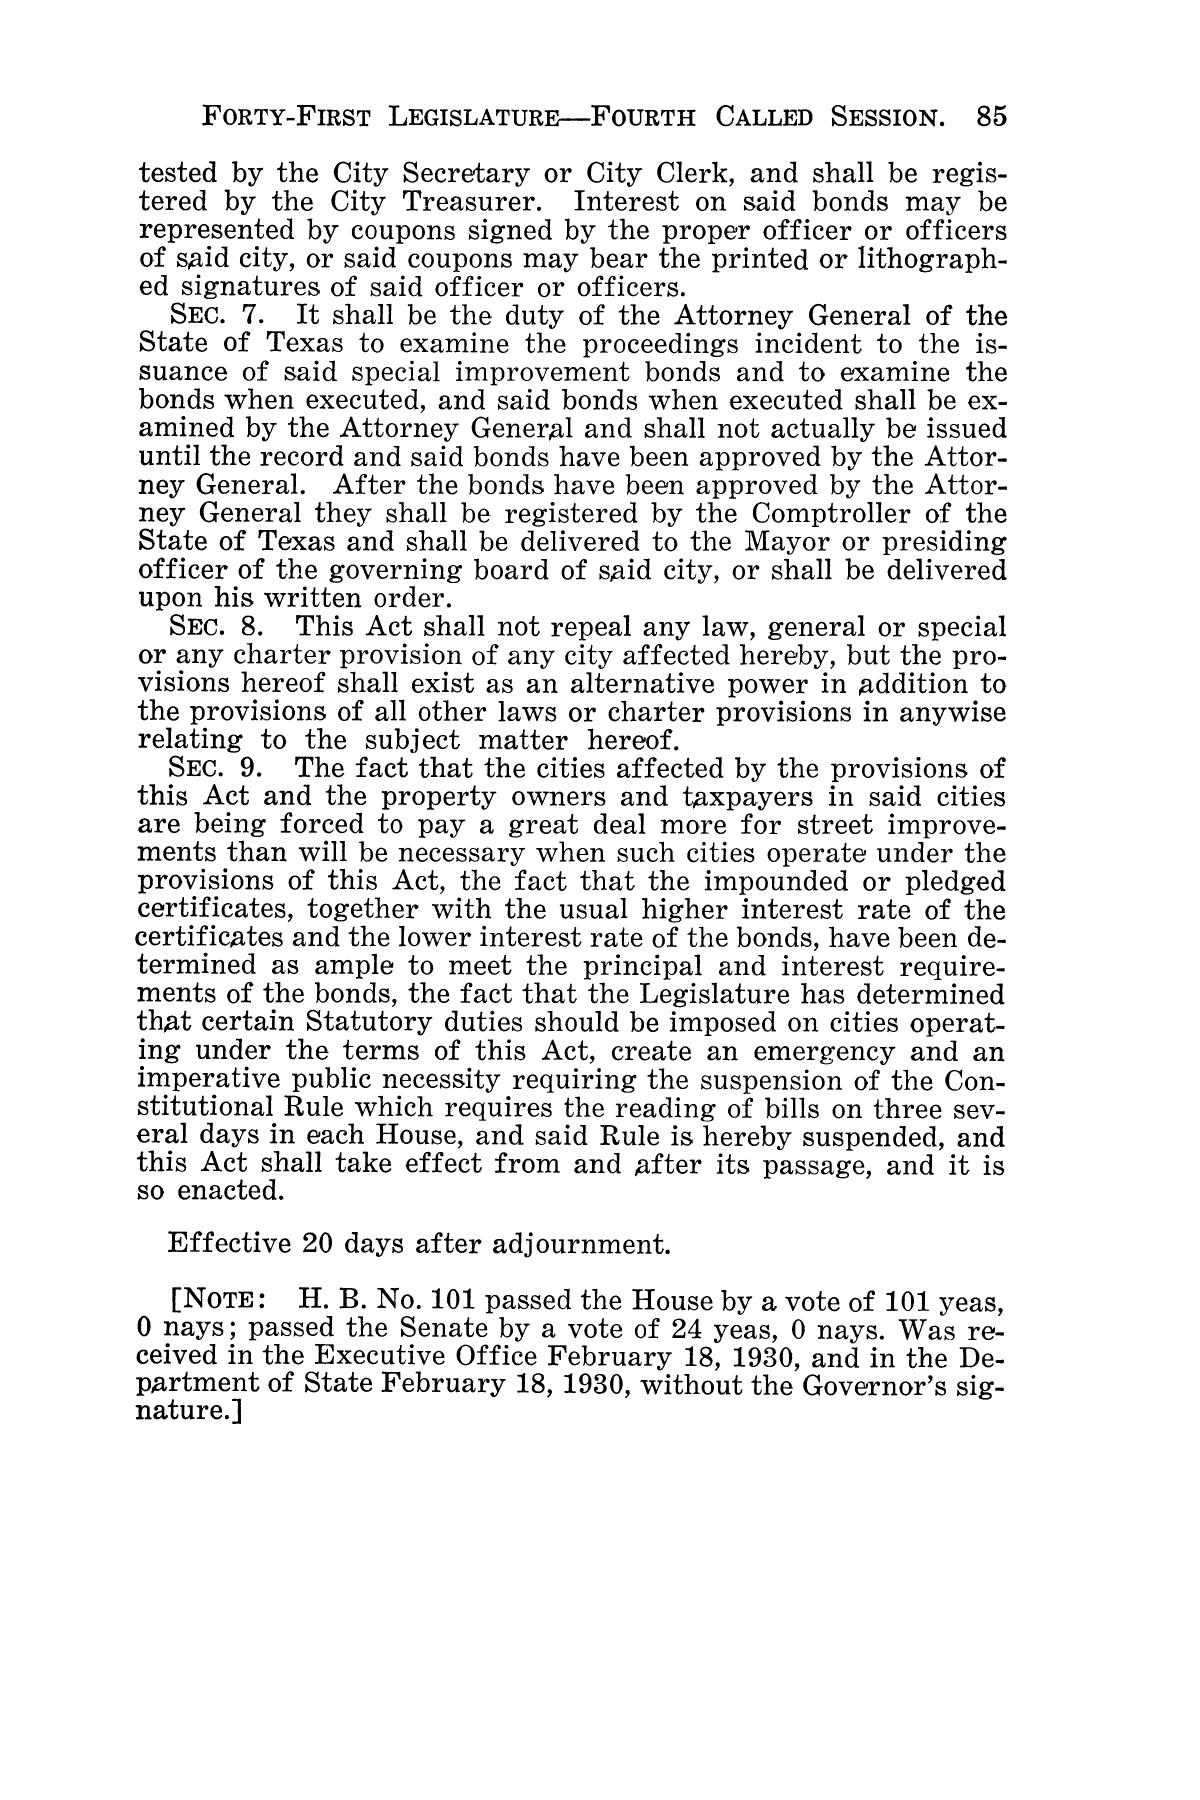 The Laws of Texas, 1929-1931 [Volume 27]
                                                
                                                    [Sequence #]: 97 of 1943
                                                